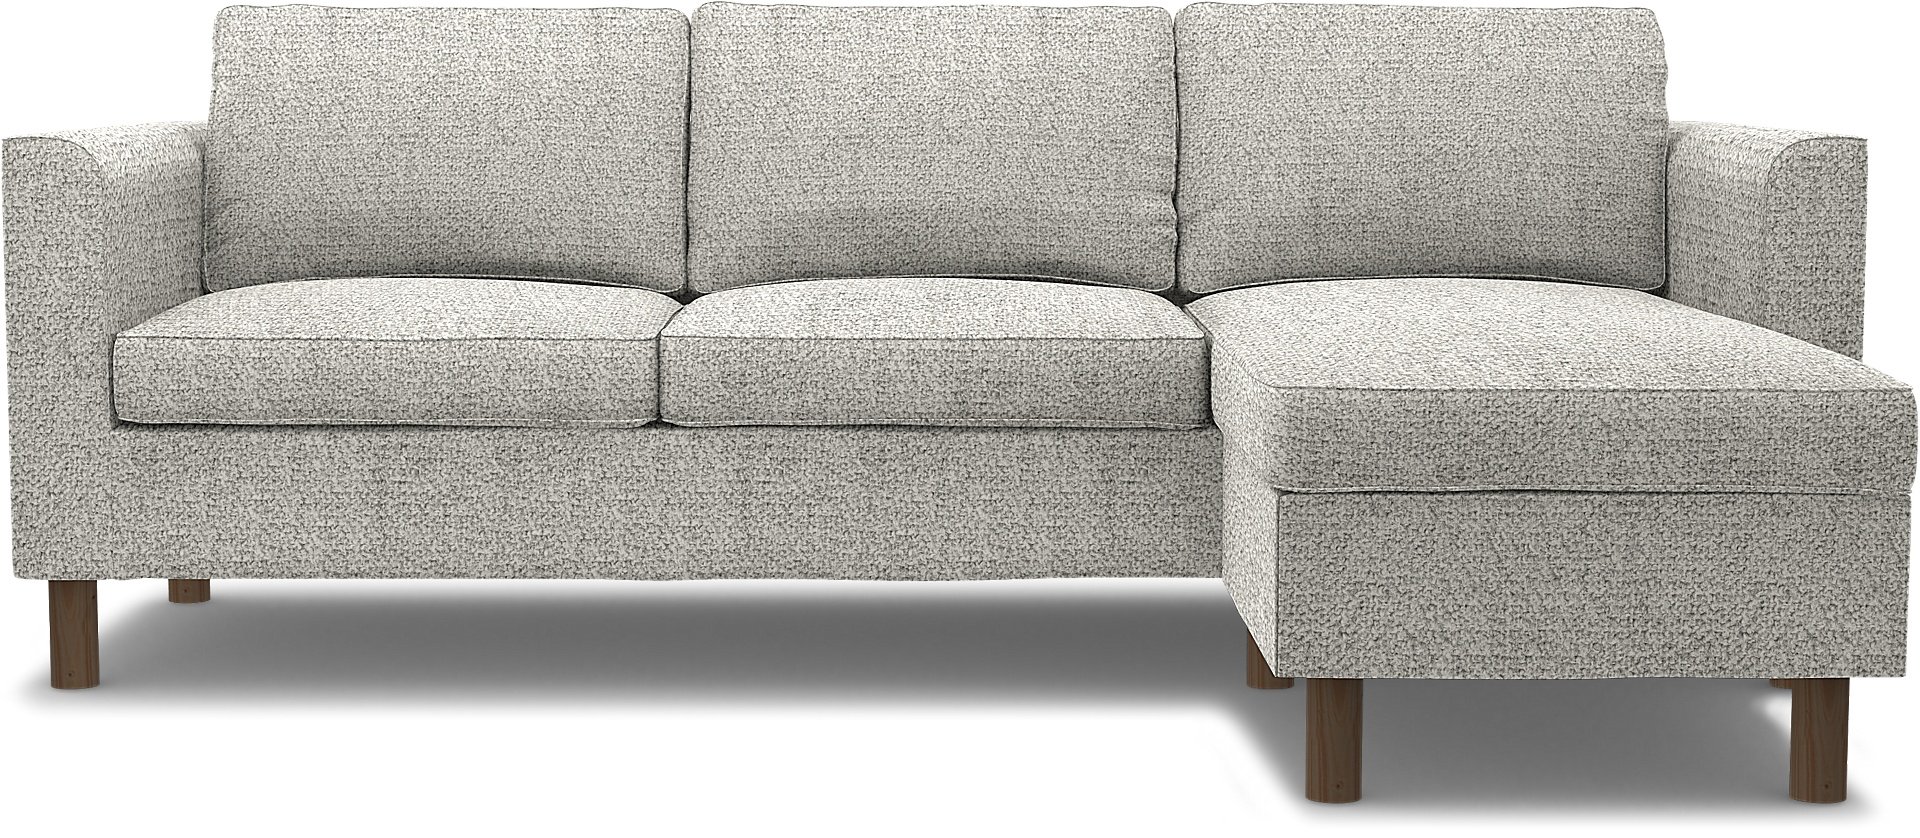 IKEA - Parup 3 Seater with chaise longue, Driftwood, Boucle & Texture - Bemz